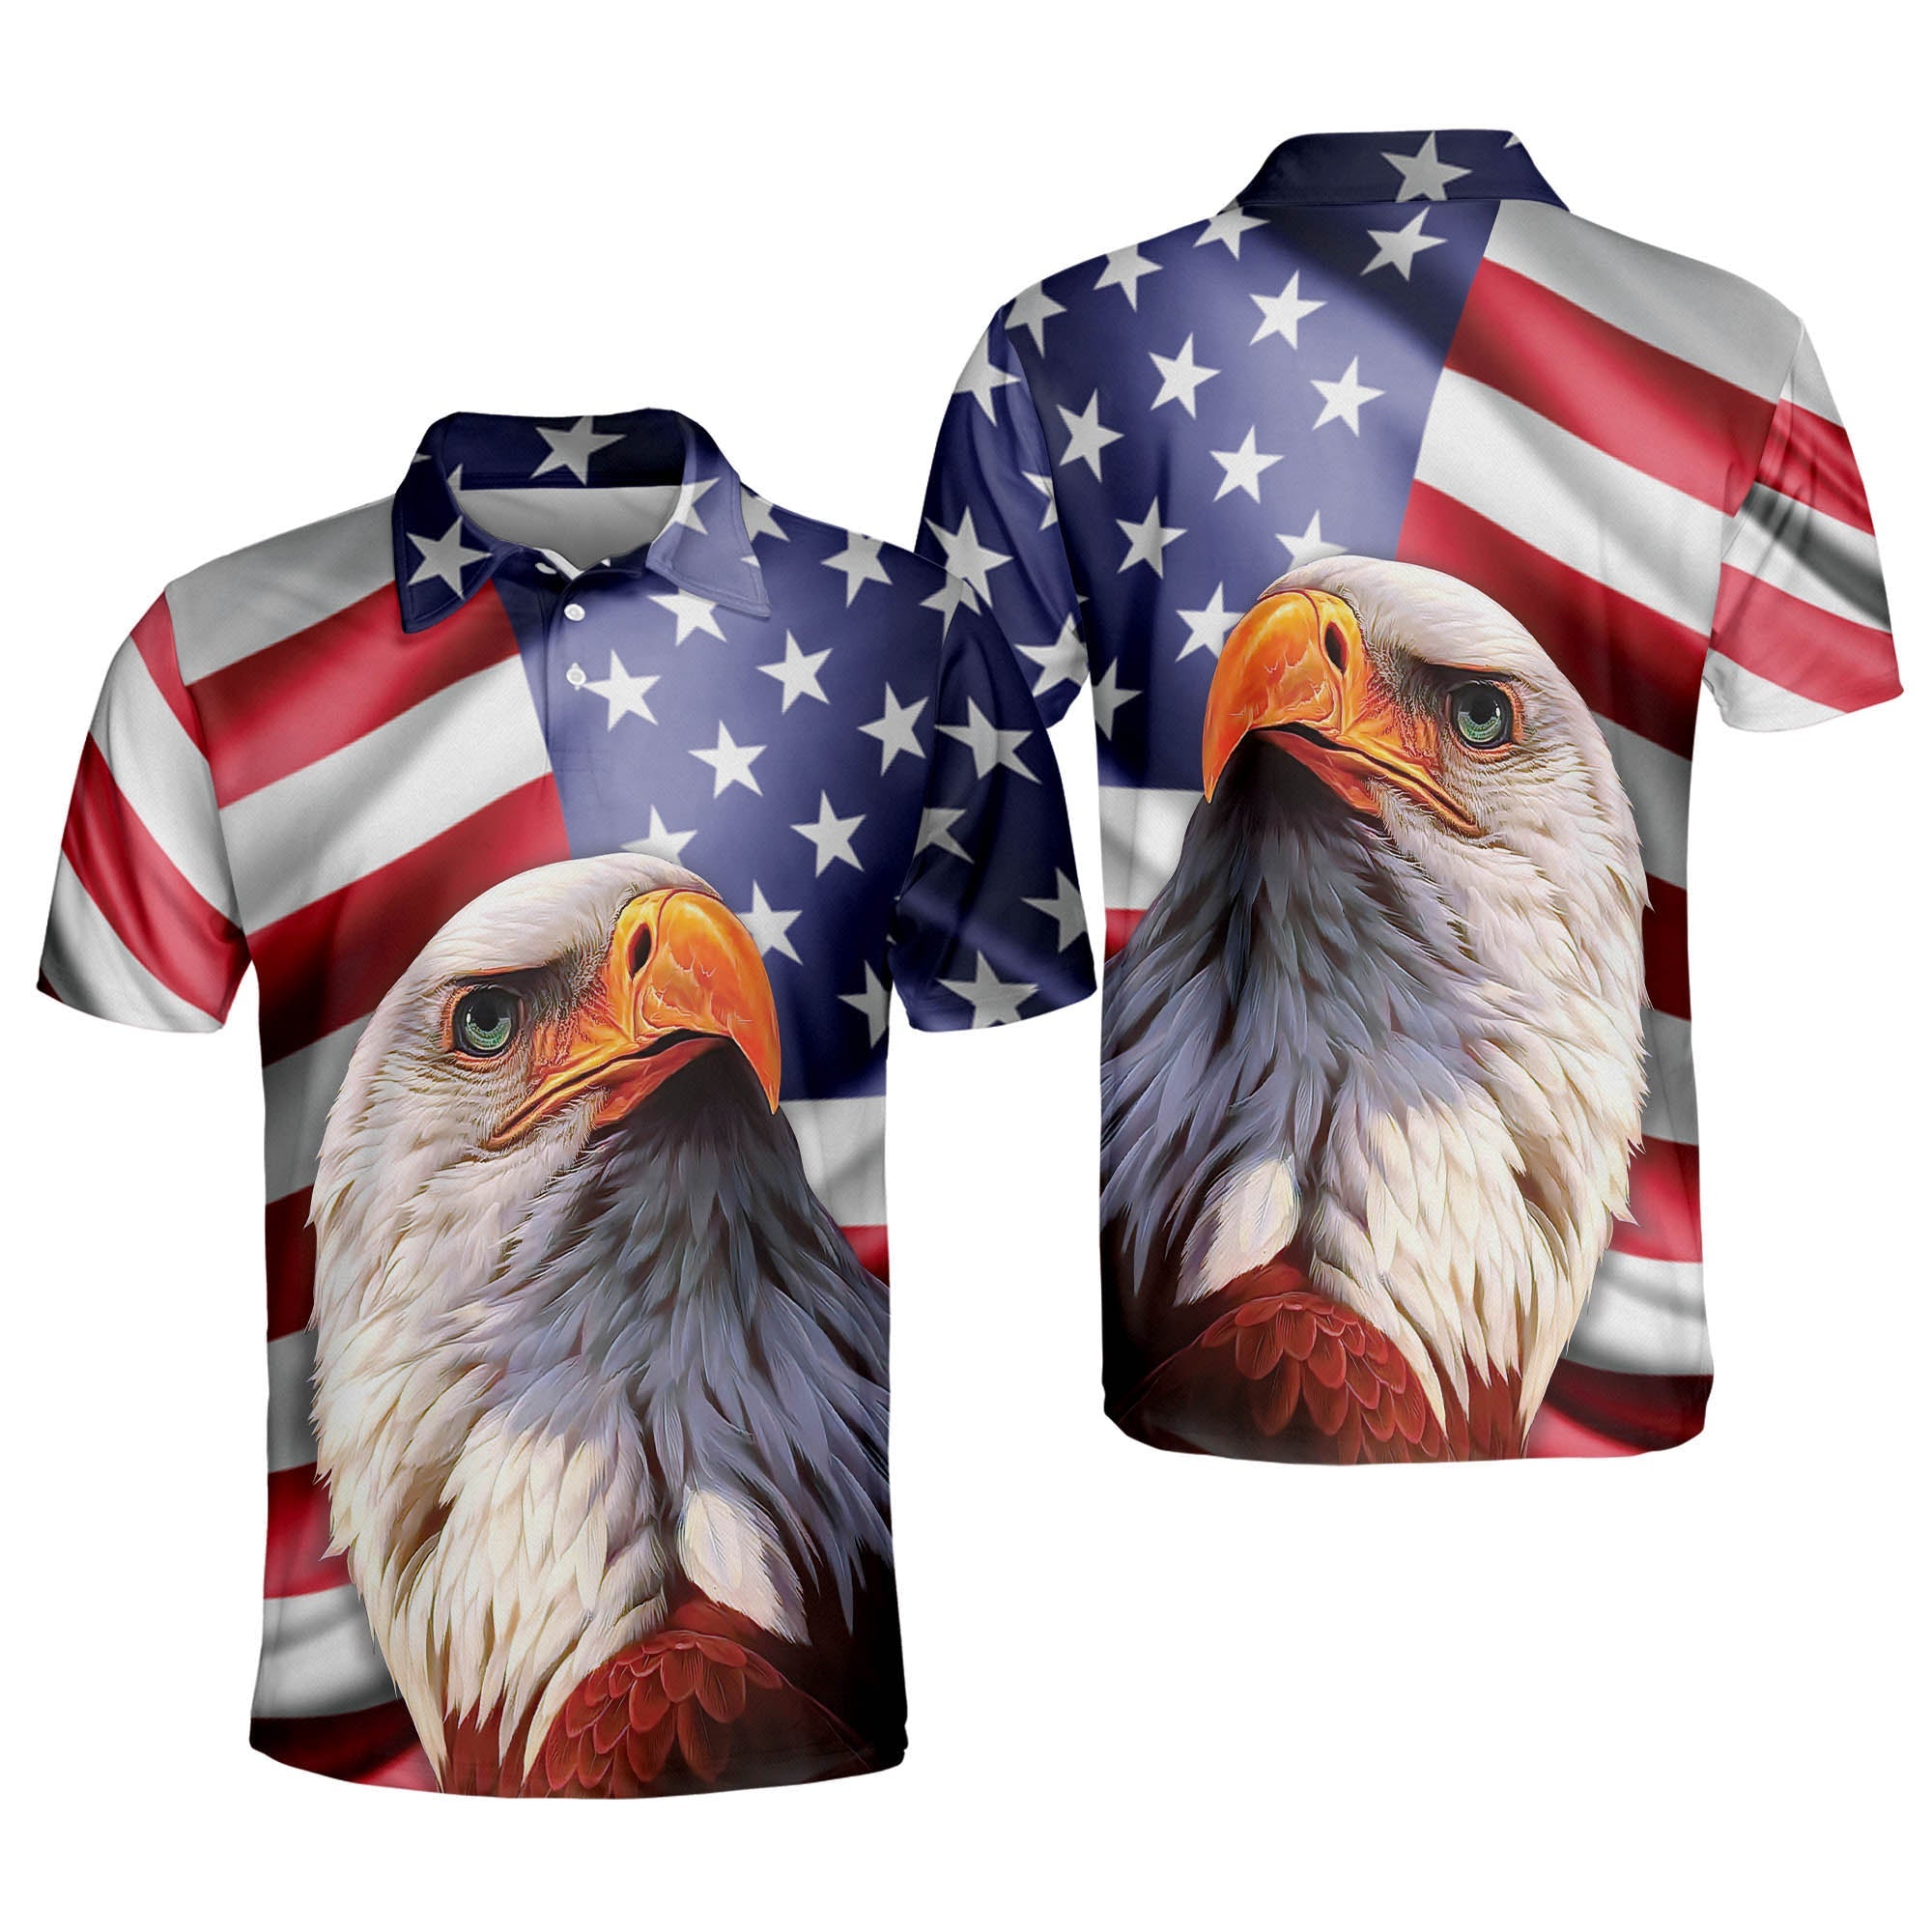 3D All Over Print Patriotic American Design With Eagle Polo Shirt/ Idea Shirt for Men in Independence Day